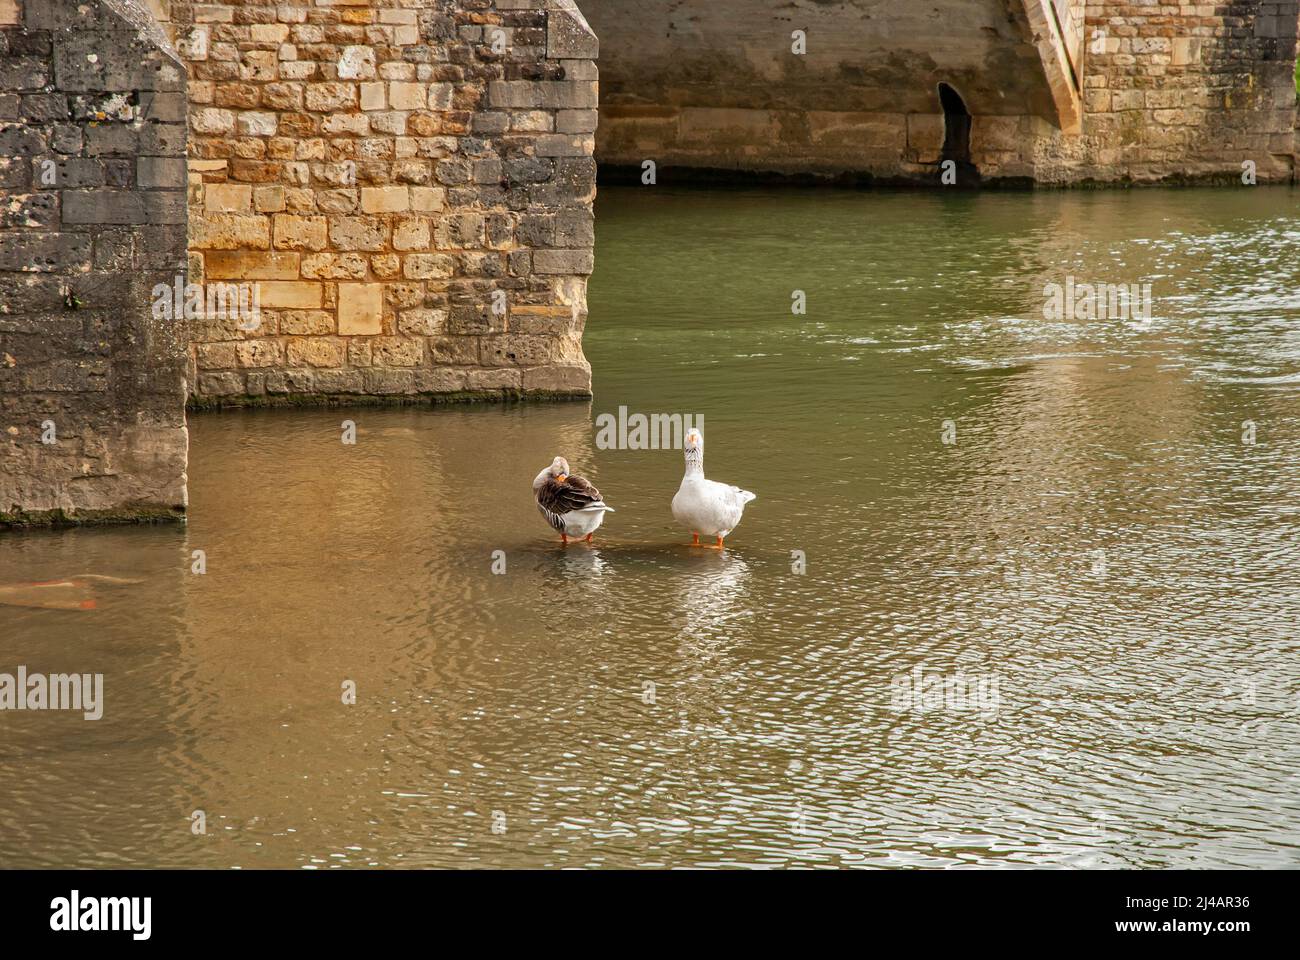 Wild geese in river waters under ancient stone bridge Stock Photo